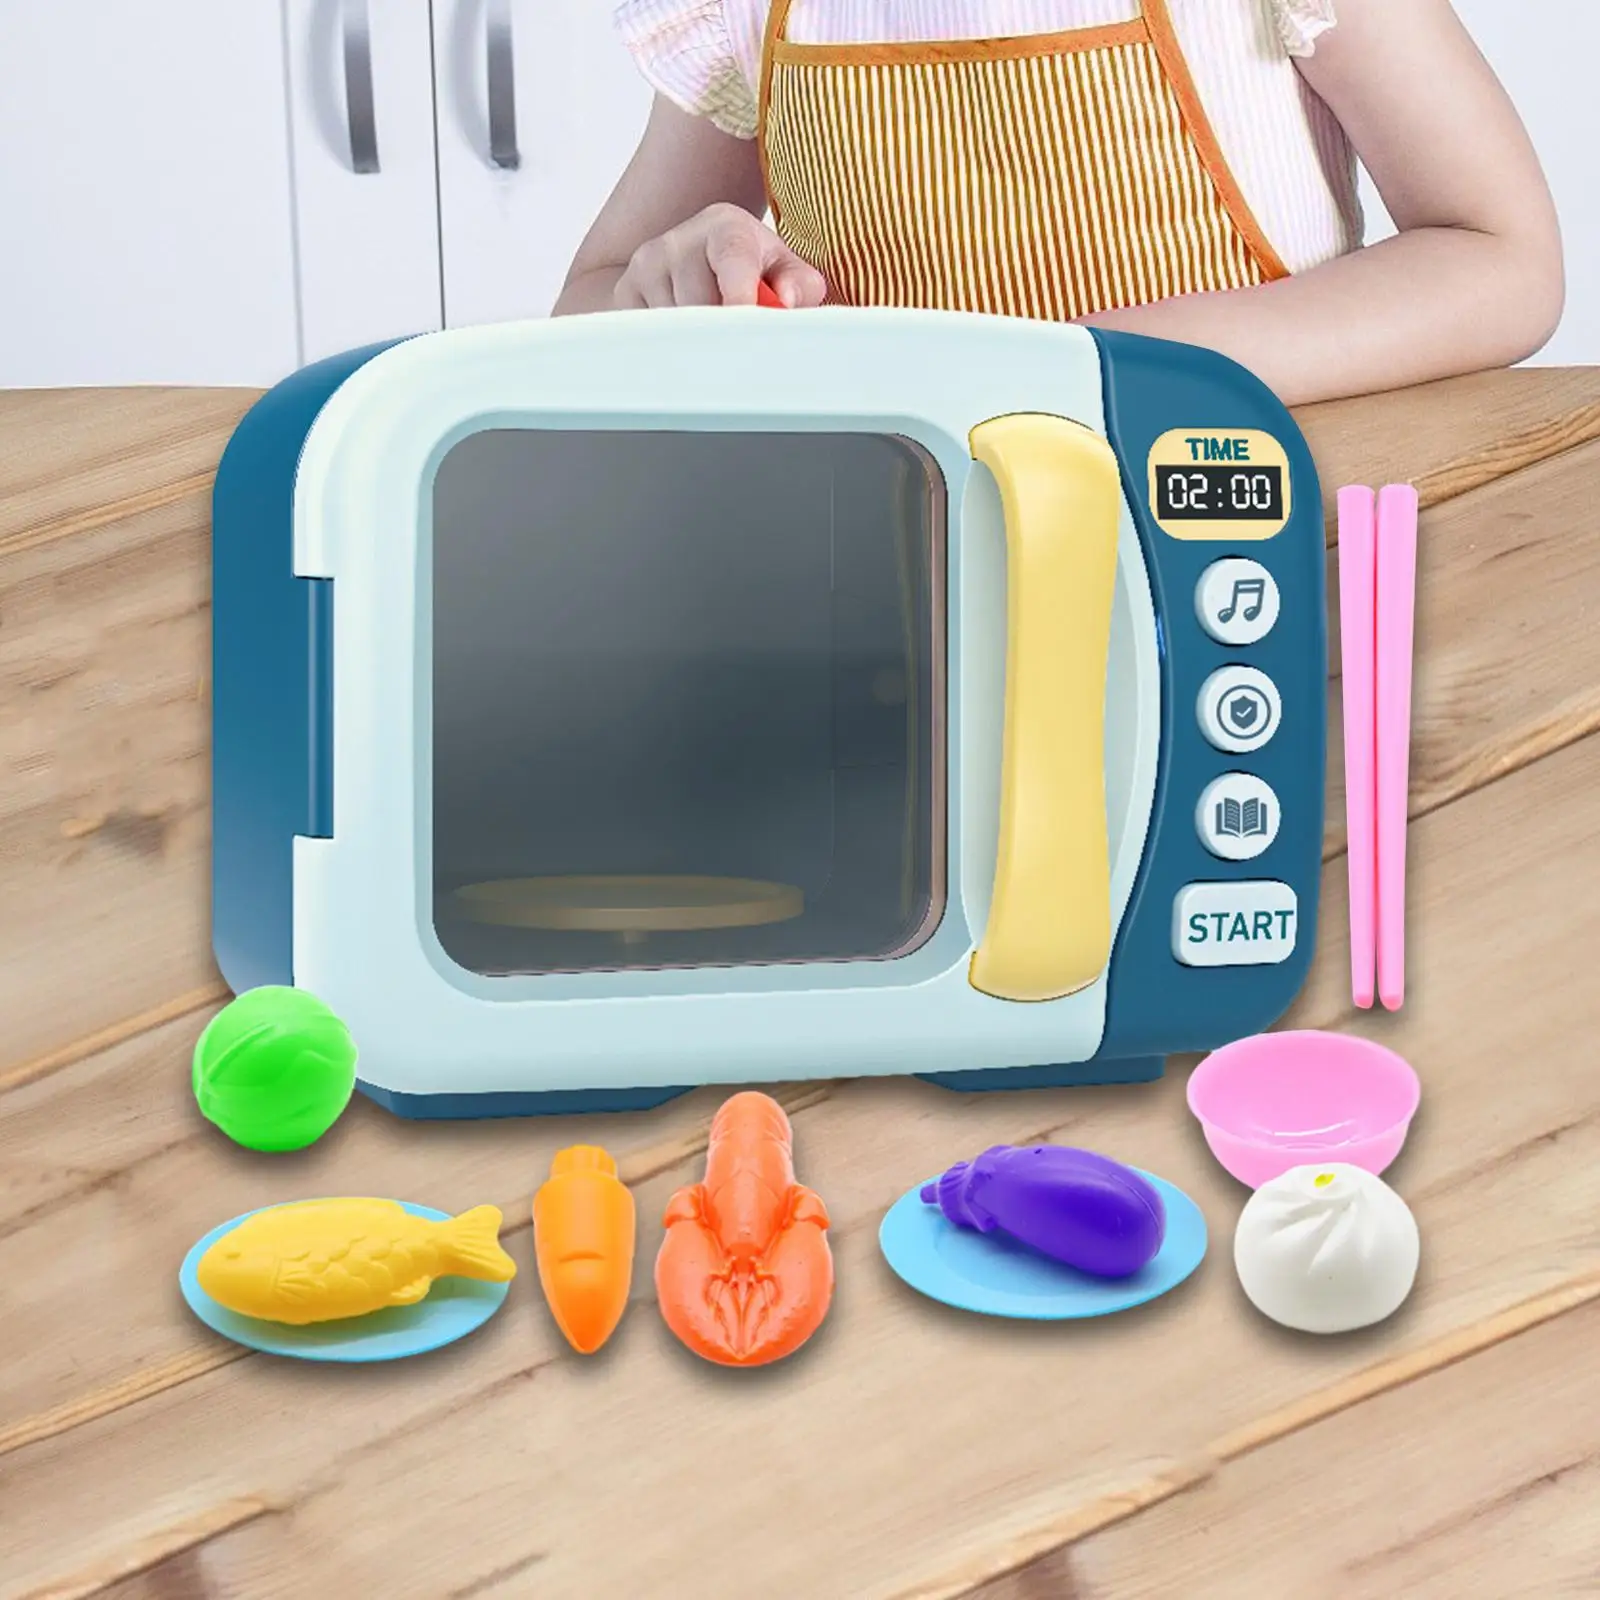 Microwave Kitchen Play Set Pretend Play Toy for Girls Boys Kids 3-8 Year Old